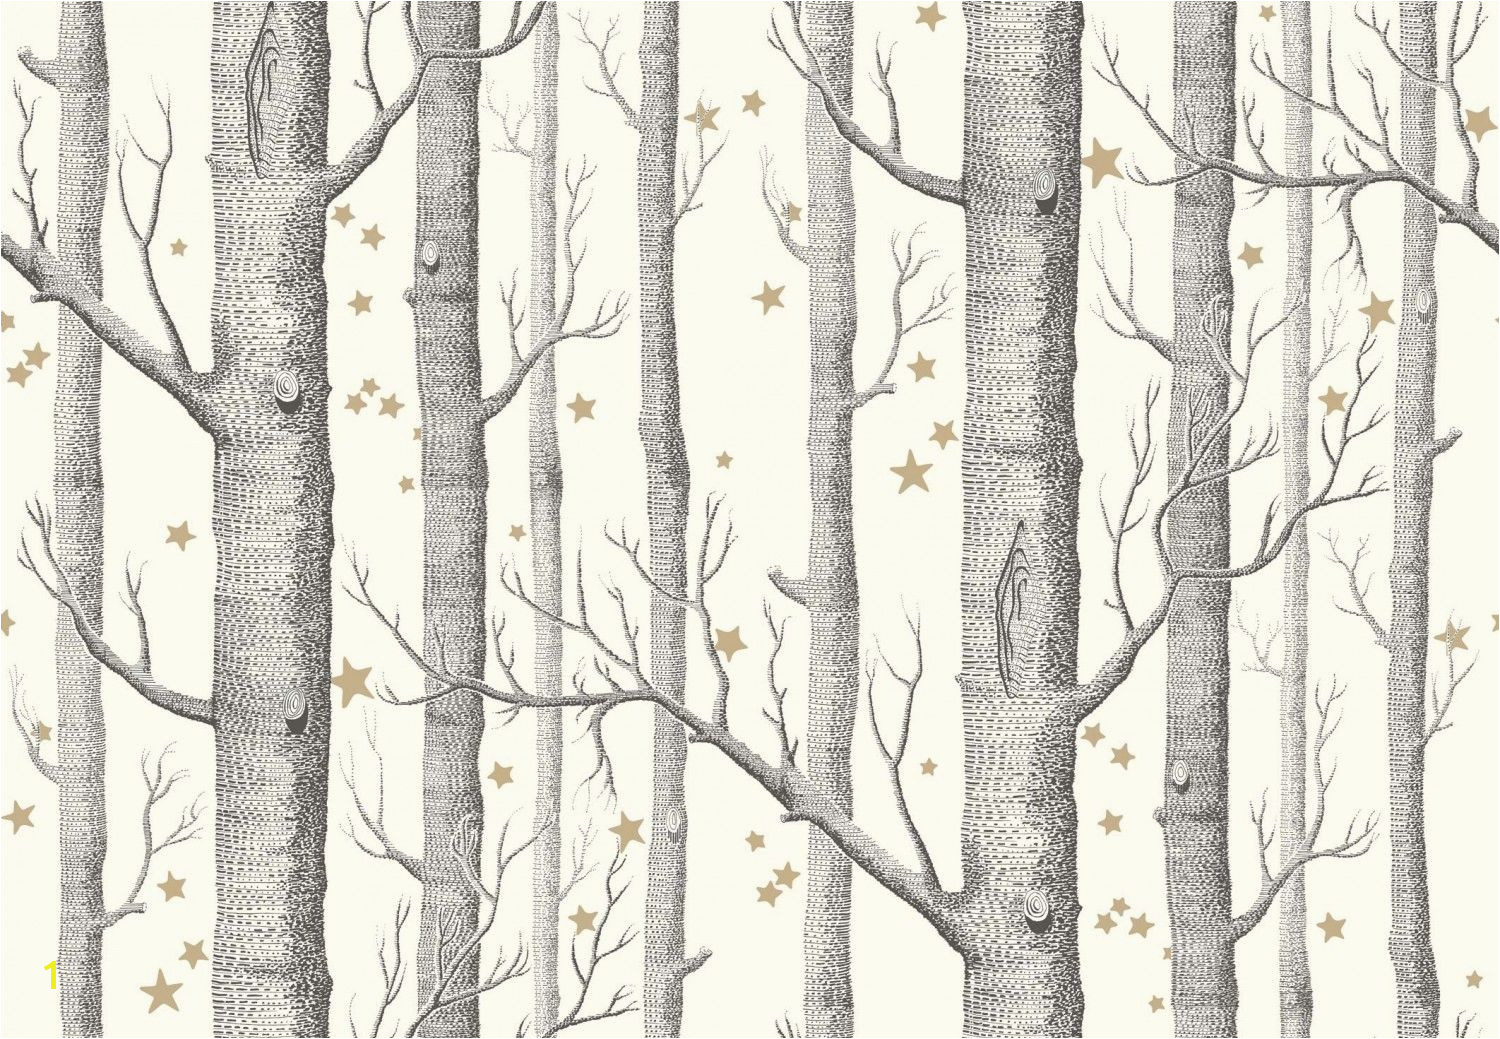 Birch Tree Wall Mural Target Cole & son Whimsical Woods & Stars 103 R Room